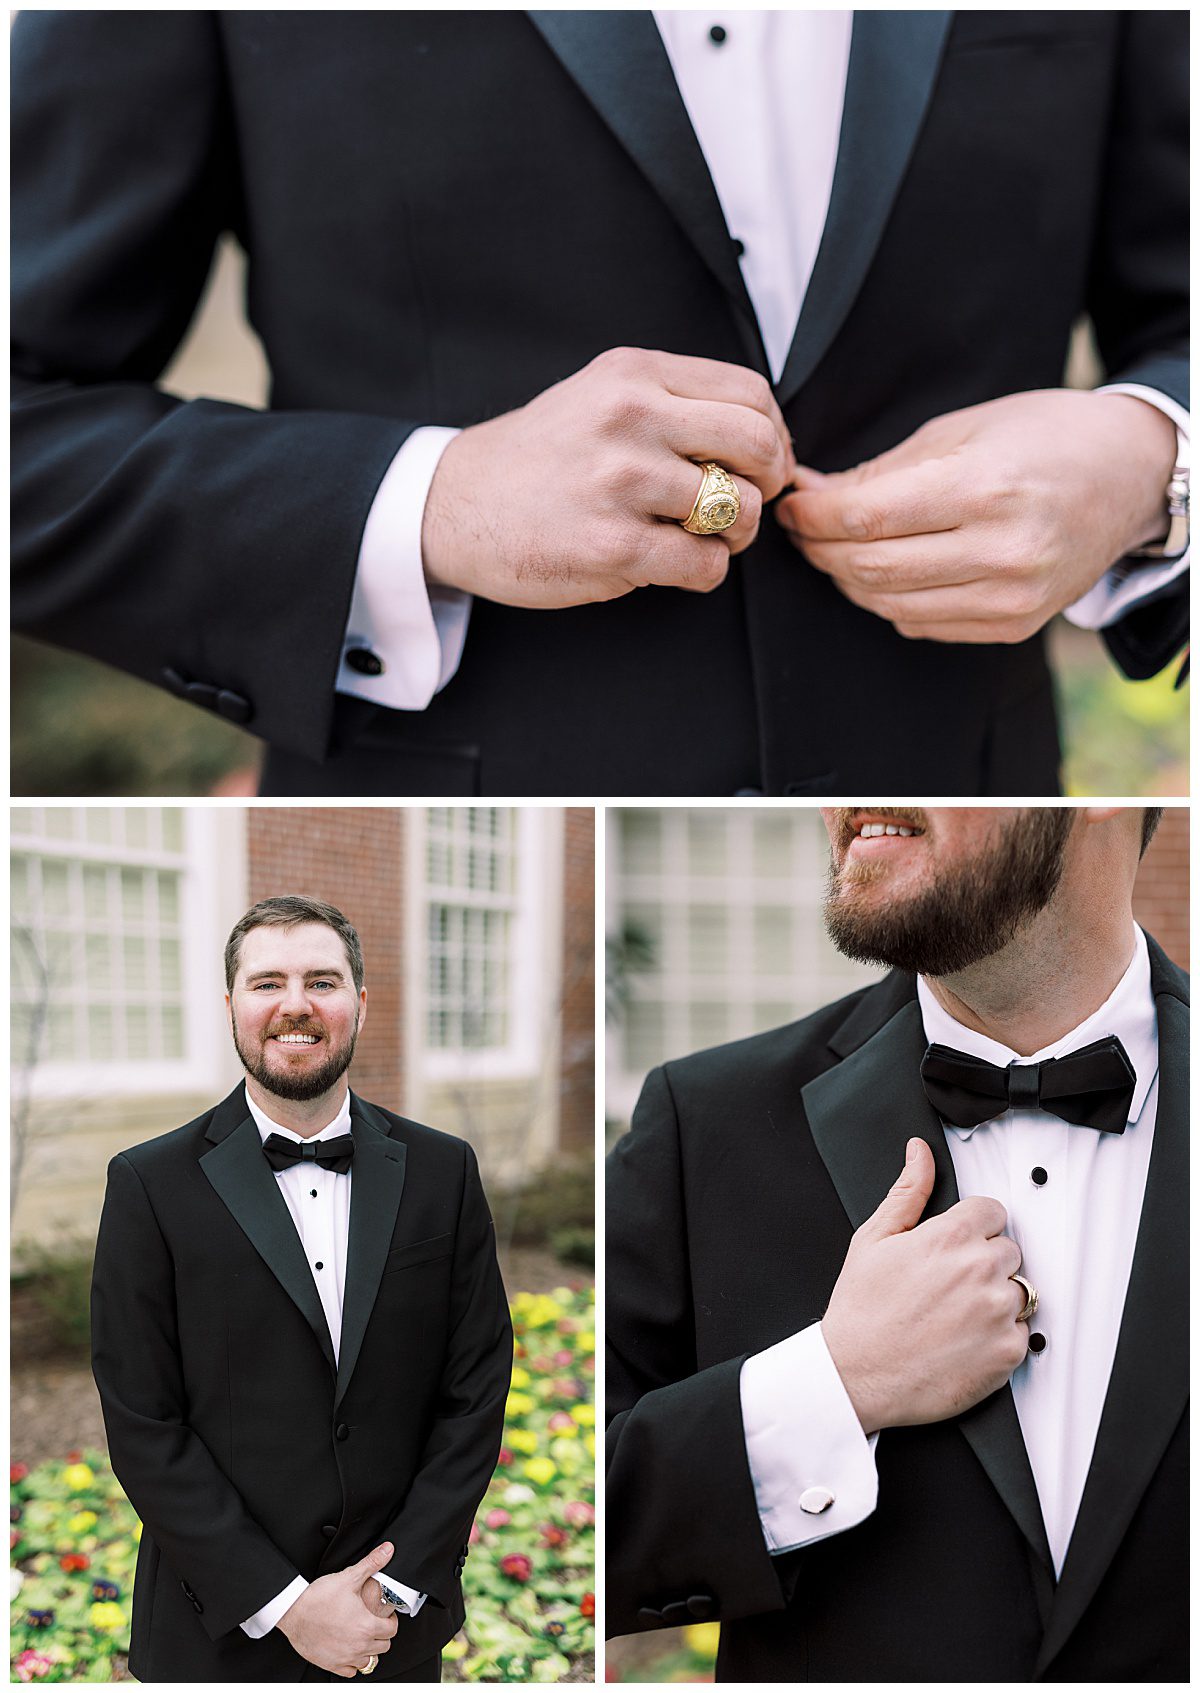 Groom portraits at The Colonial Country Club in Fort Worth, Texas taken by Brittany Partain, a DFW wedding photographer. 